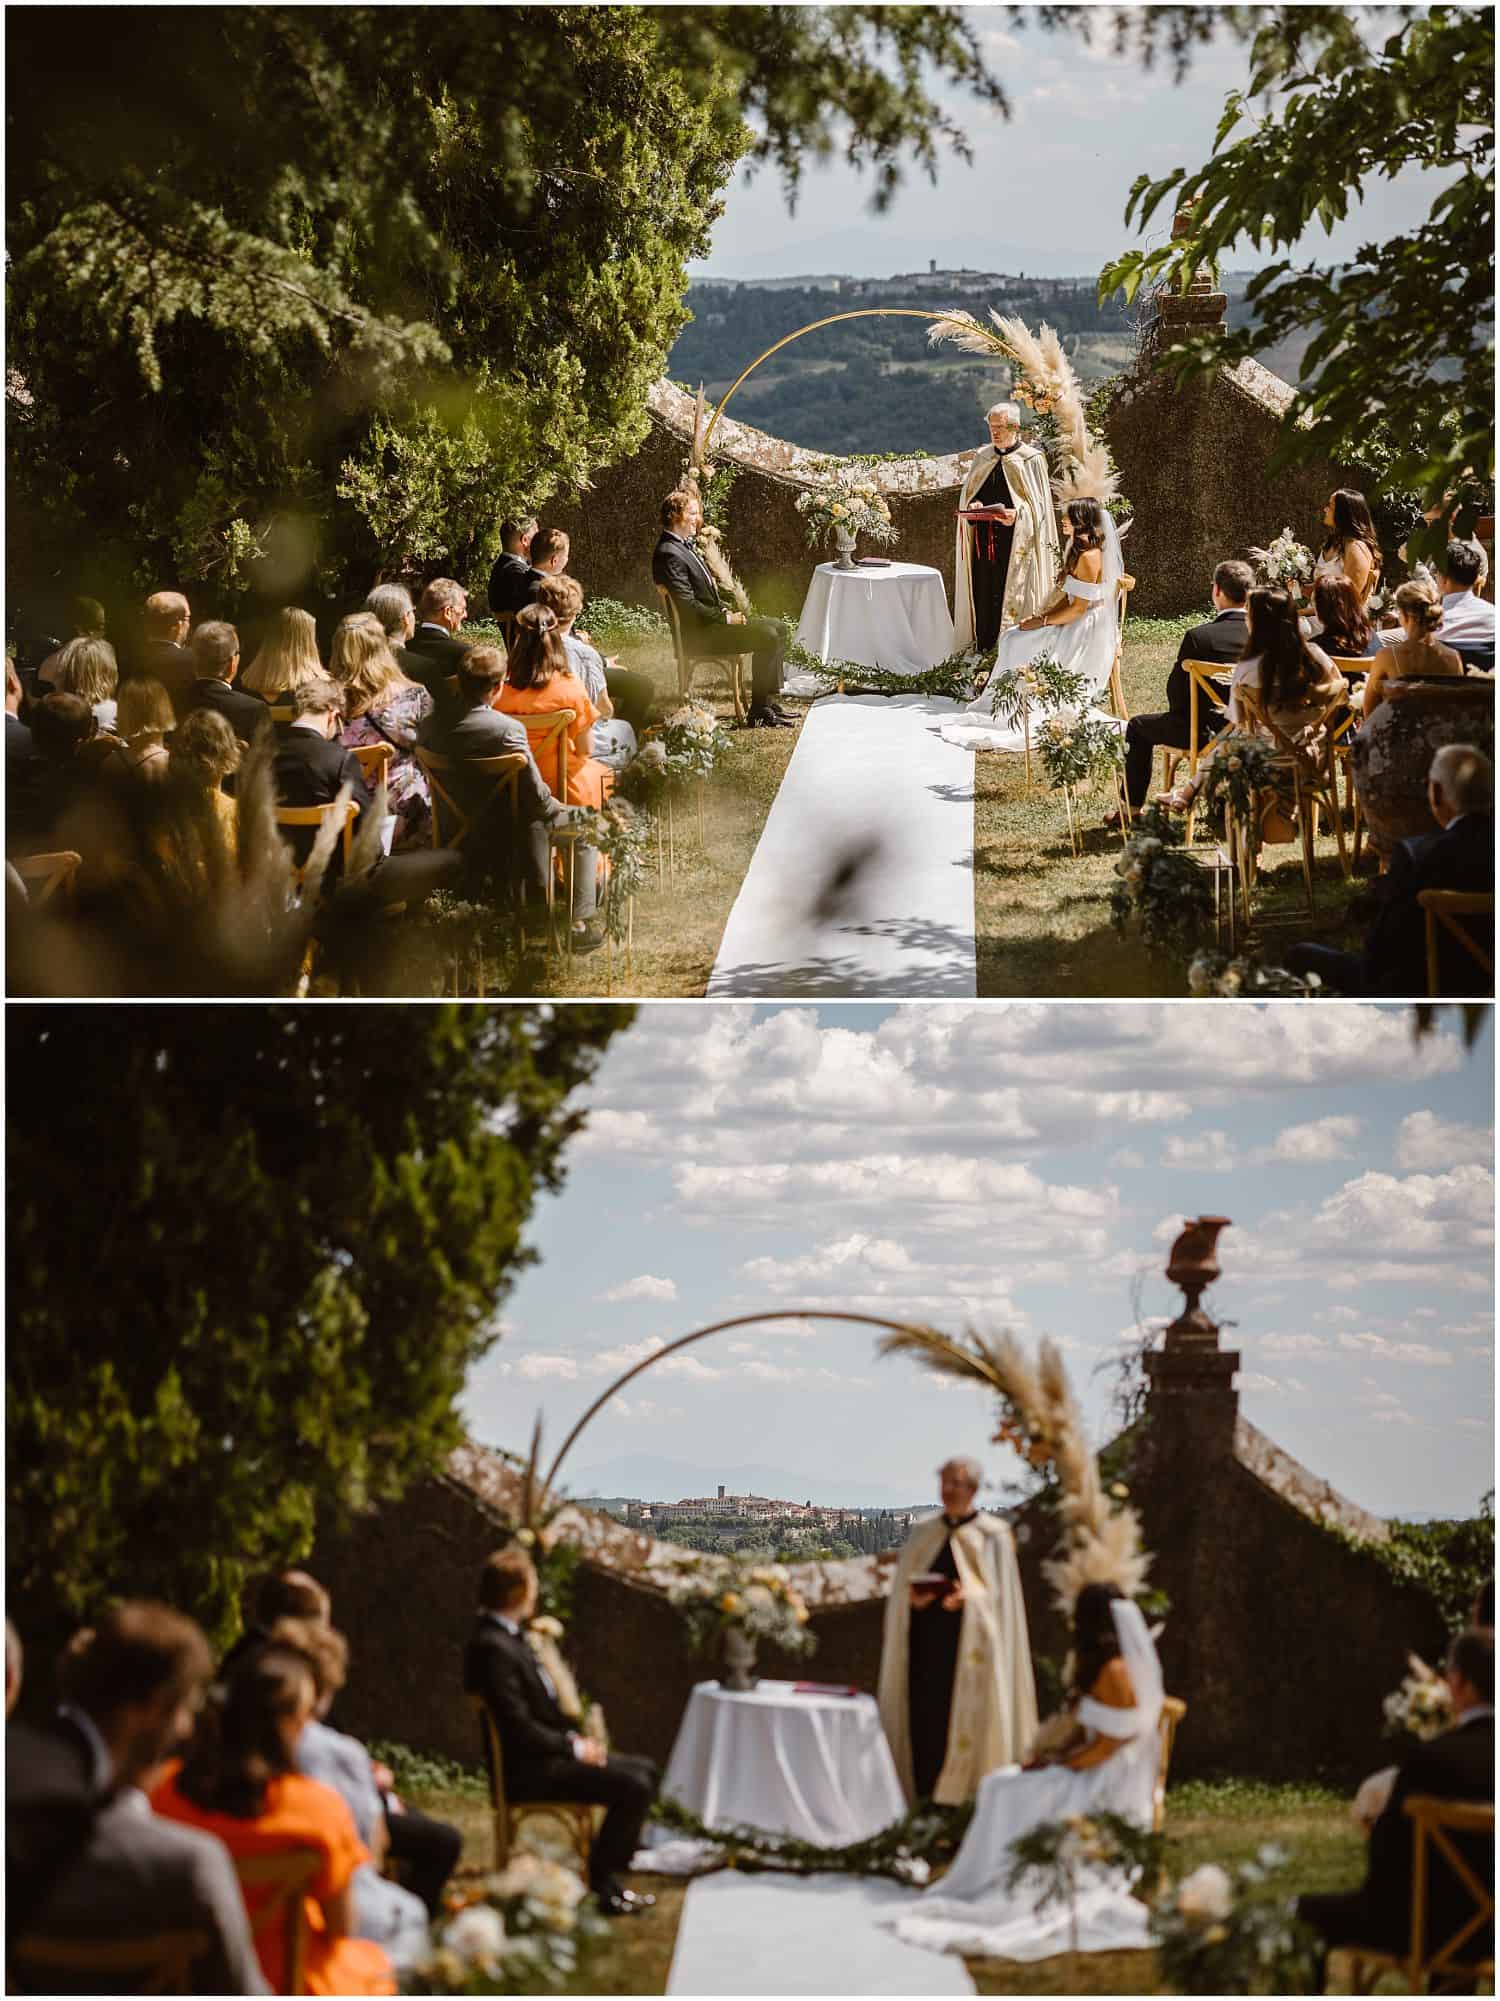 Destination wedding ceremony in Borgo Castelvecchi with a view on the Tuscany countryside